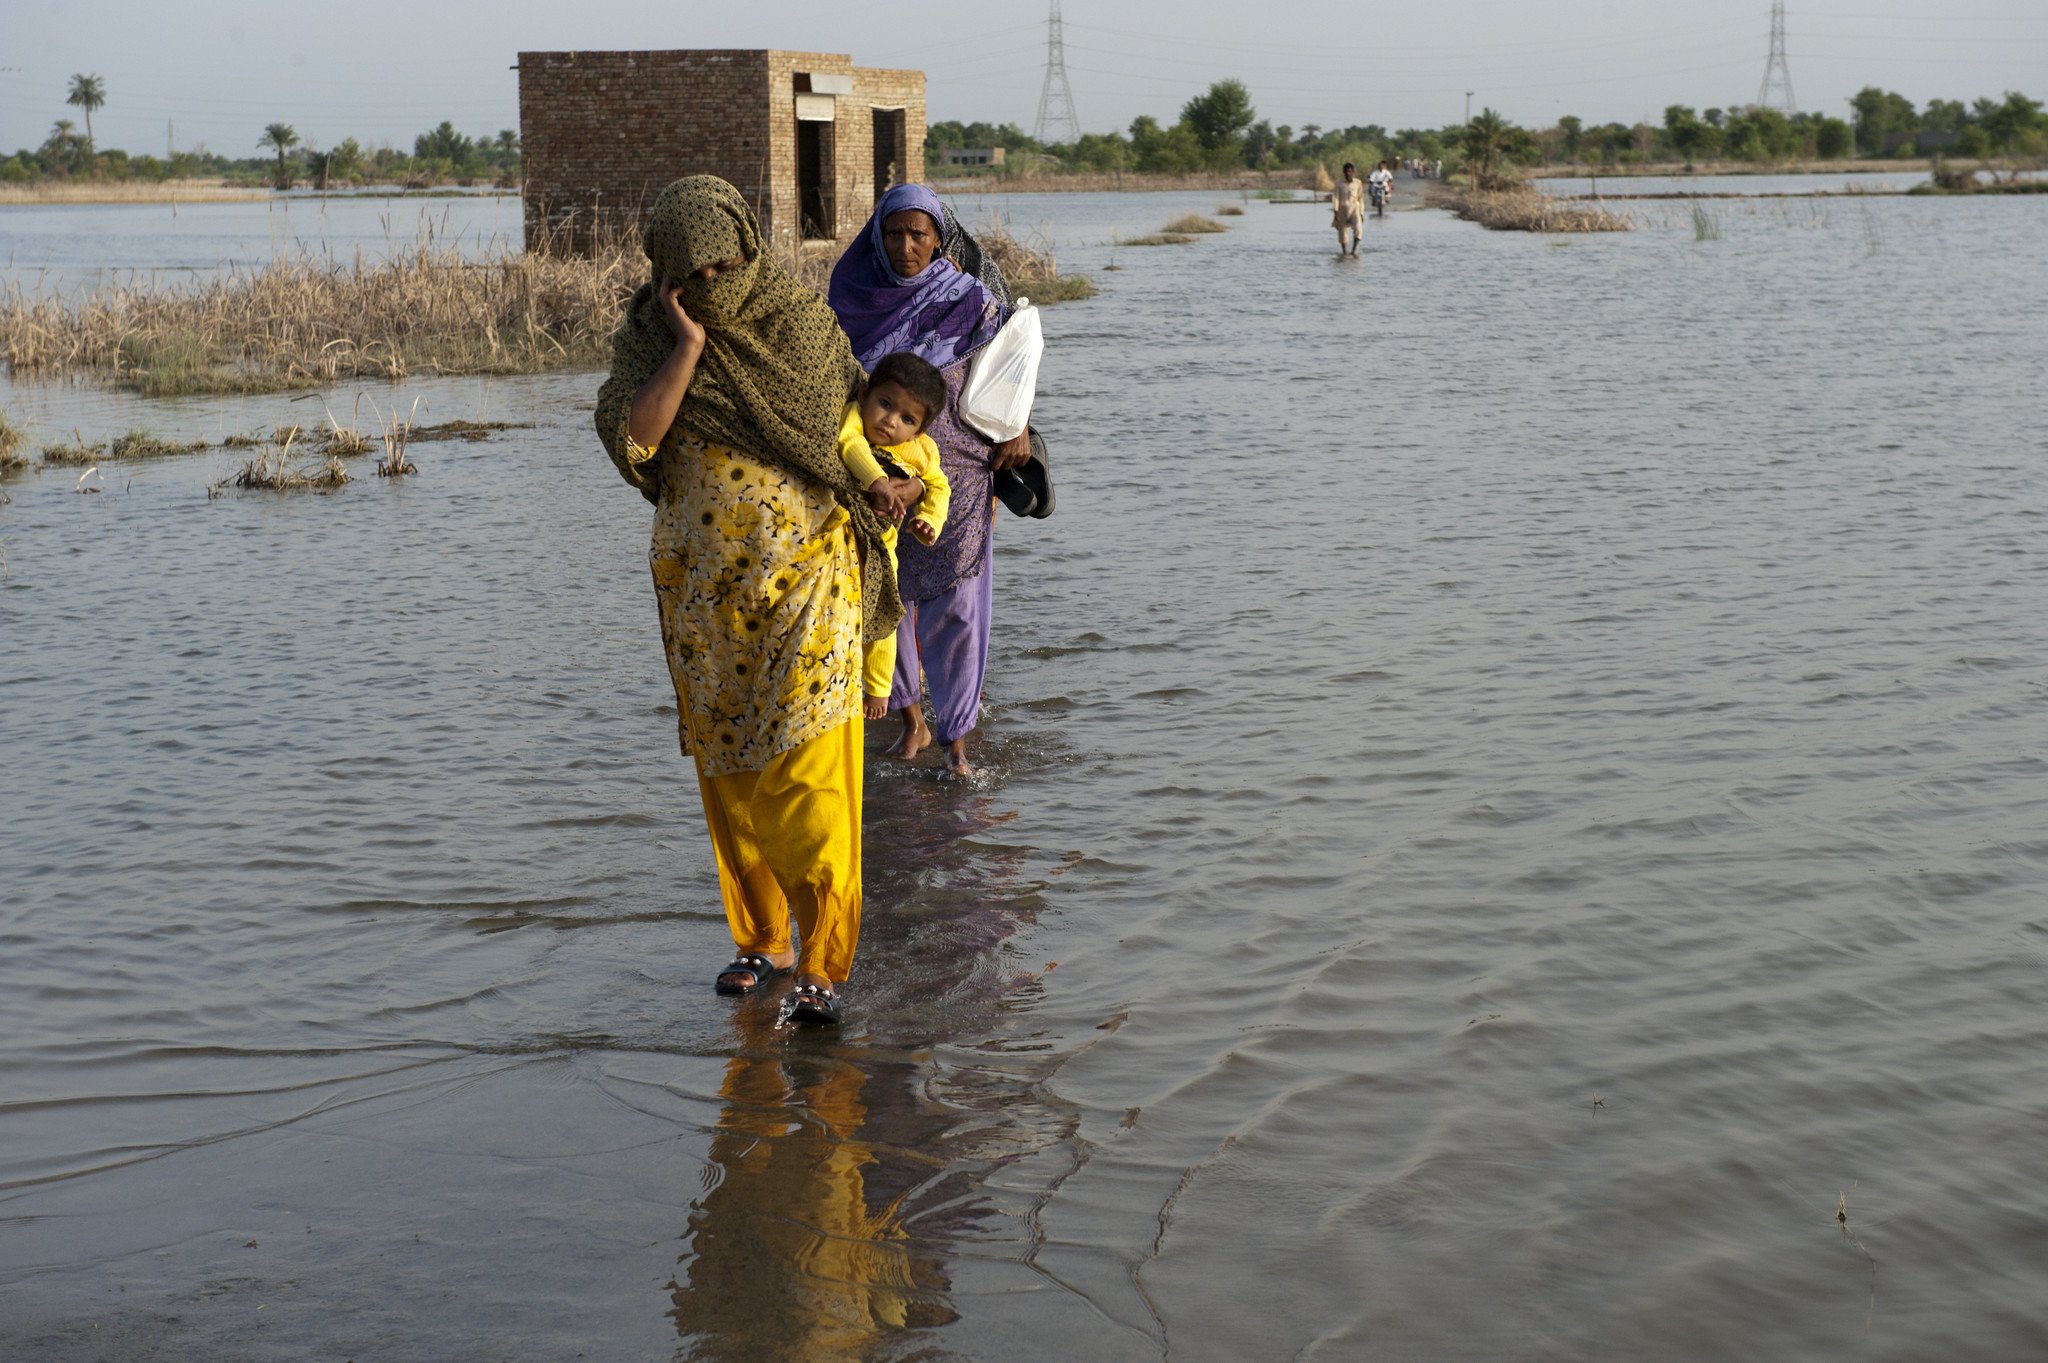 A family crosses the flooded streets of Pakistan. Credit: ADB